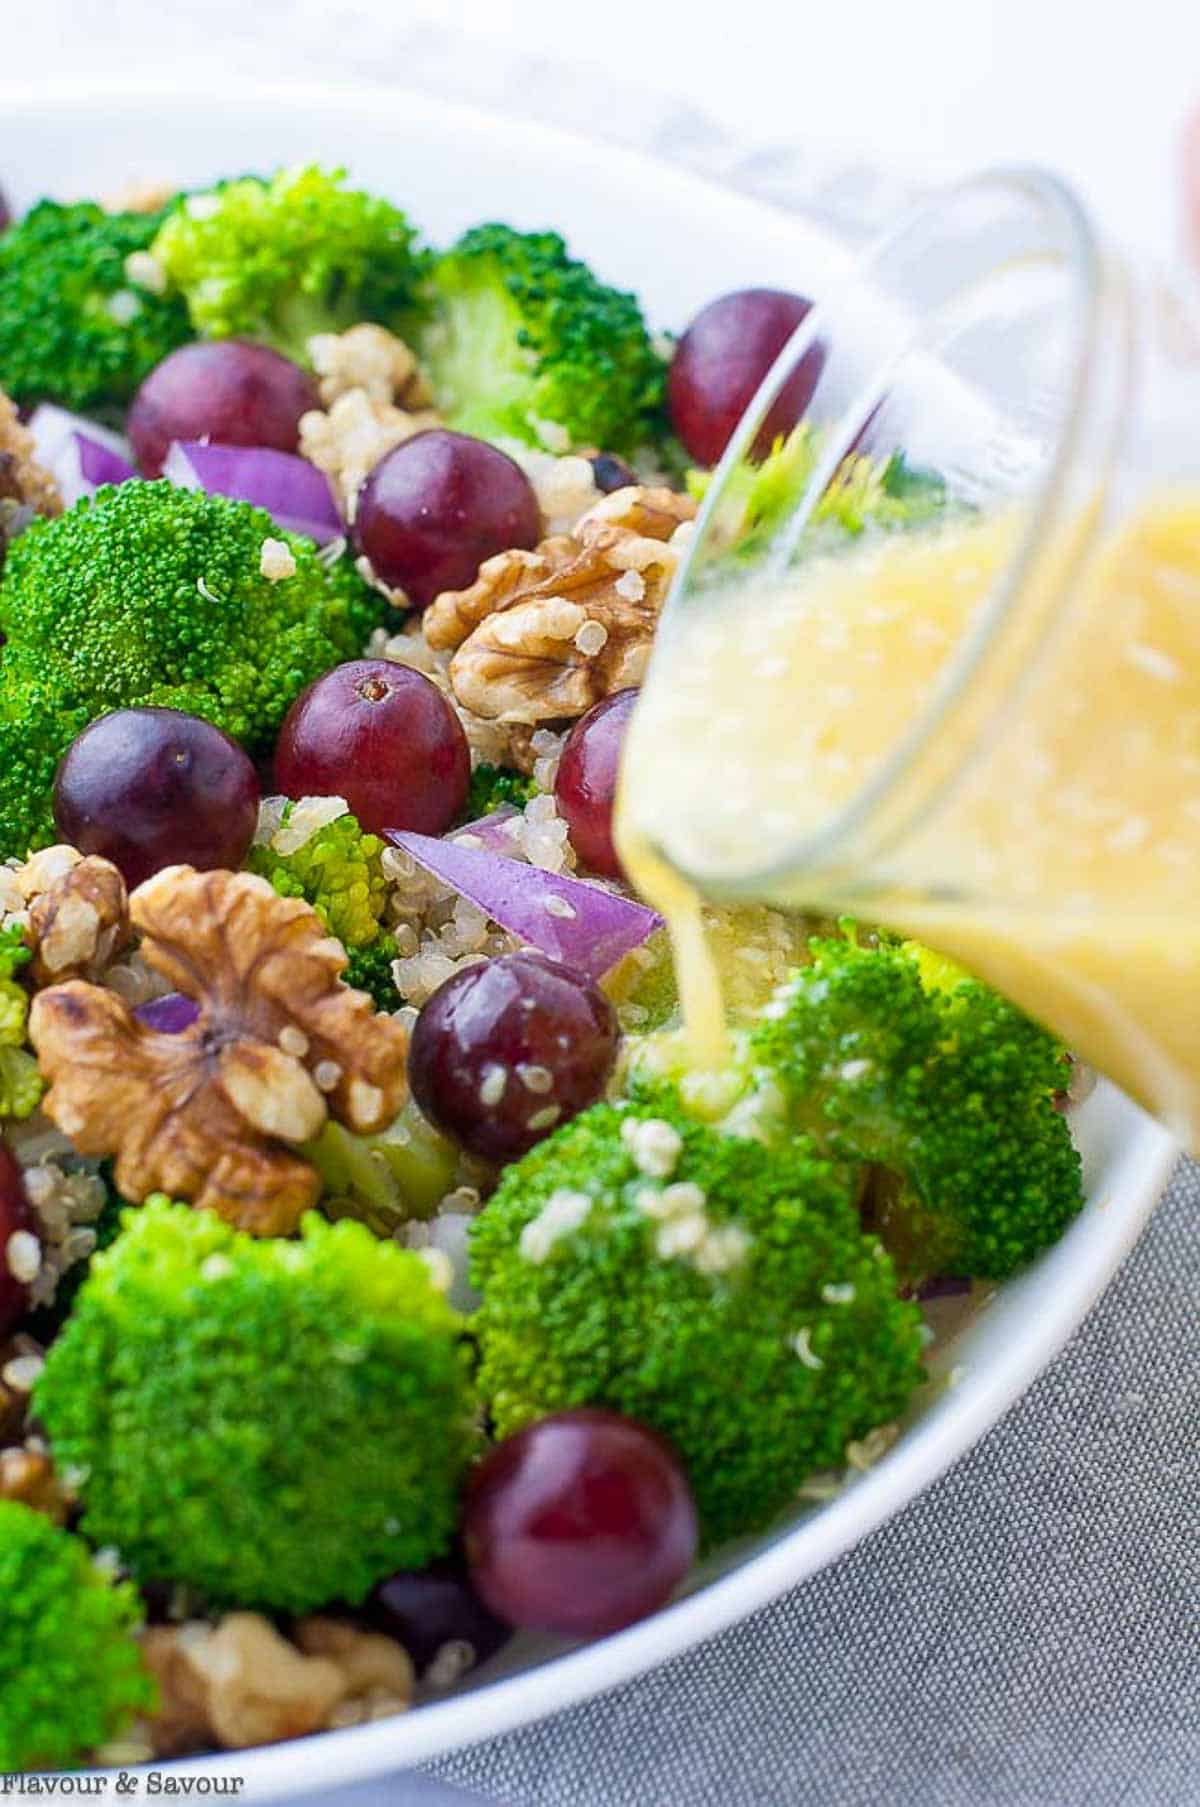 Pouring dressing on a bowl of broccoli quinoa salad with red grapes.